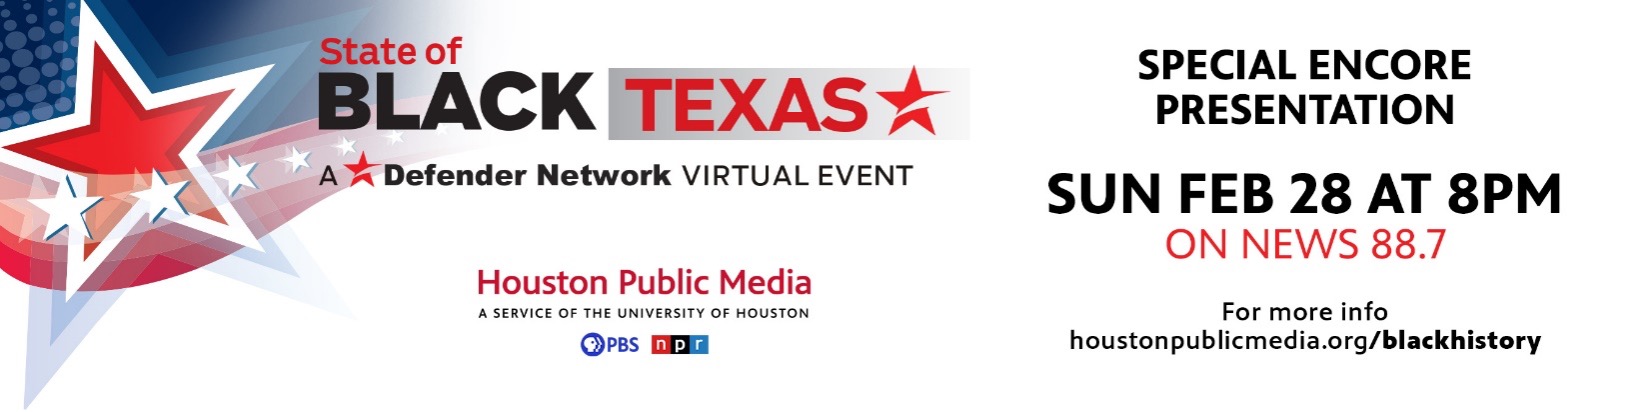 The State of BLACK TEXAS: A Defender Network Virtual Event with Houston Public Media. Special Encore presentation on Sunday, February 28 at 8PM on News 88.7